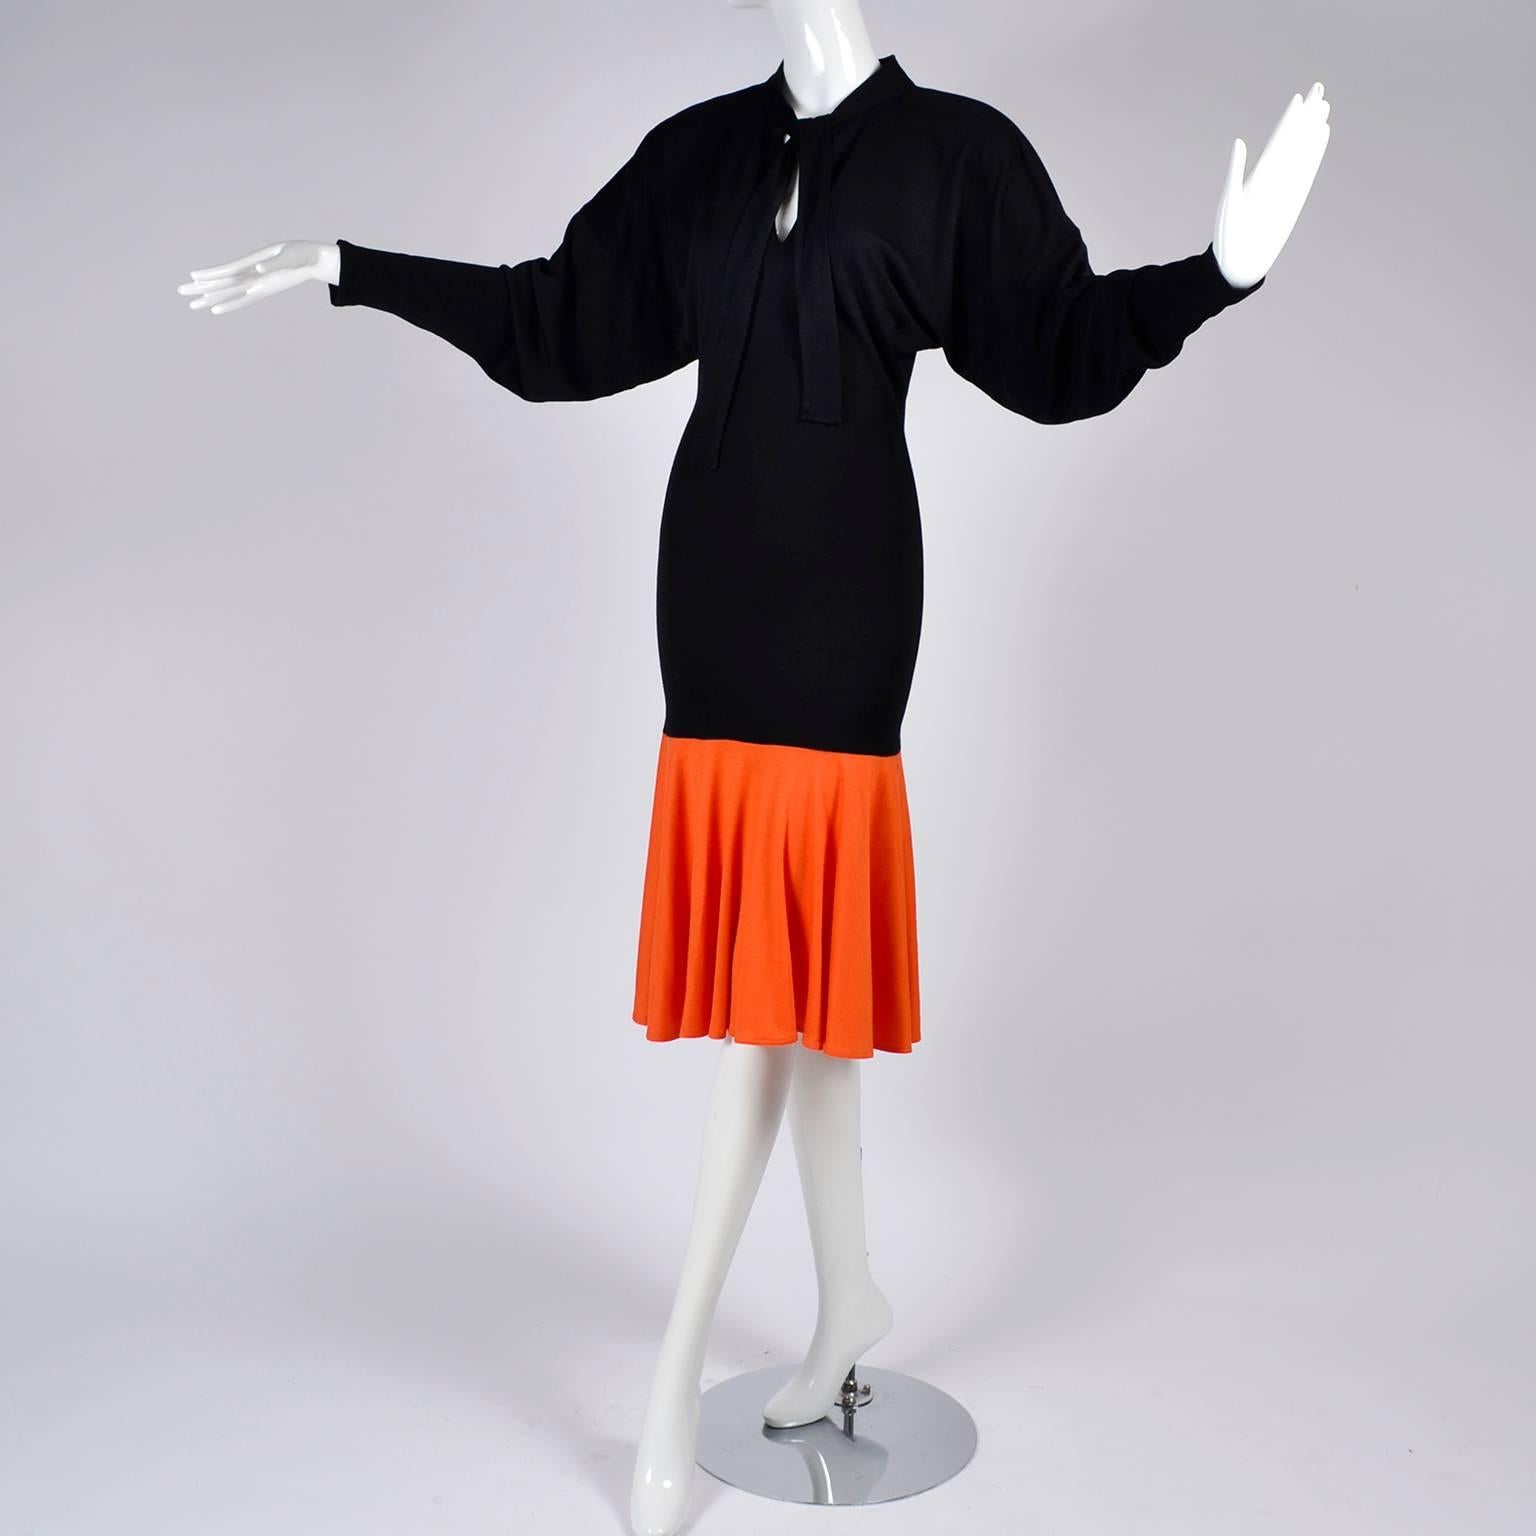 This 1980's vintage Patrick Kelly dress can be worn so effortlessly today! The dress is black jersey with an orange color block flounce hem. The dress has a fitted body, dolman sleeves and a tie at the neck that leaves a keyhole opening. We have